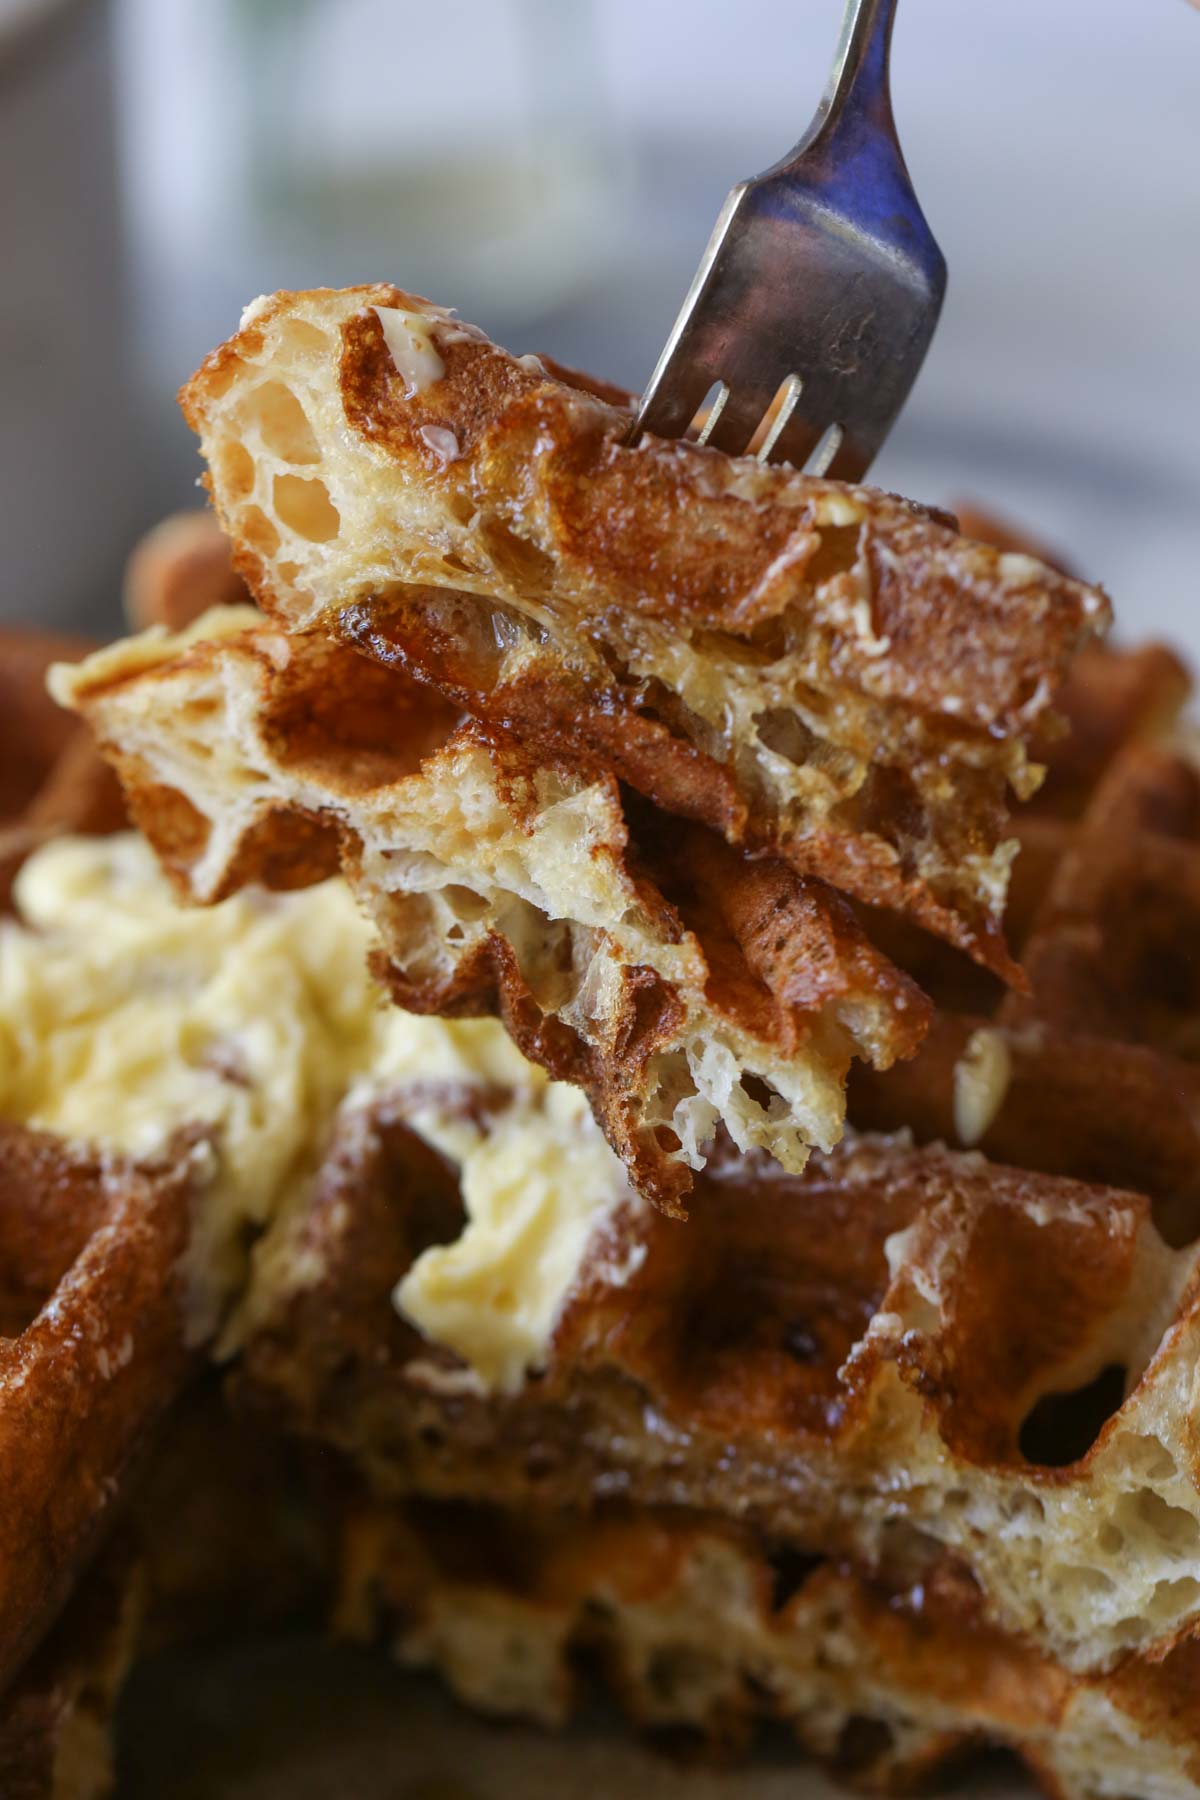 Close up shot of a fork poked into Overnight Sourdough Waffles, showing the inside texture, held above two stacked waffles on a plate.